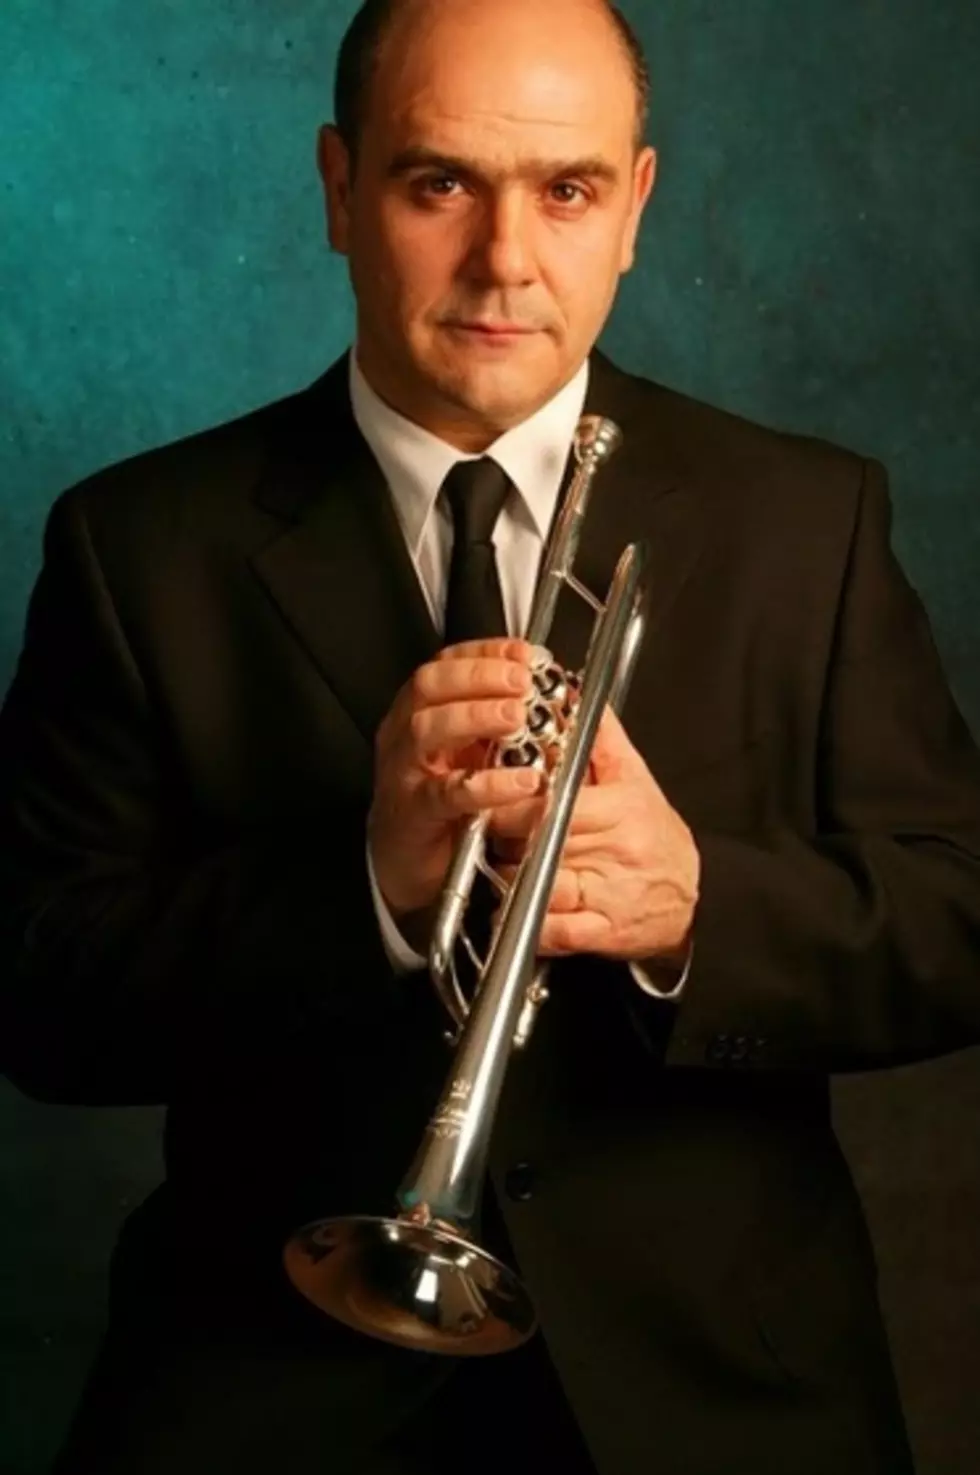 Spanish Trumpet Master to Present Master Class at Angelo State